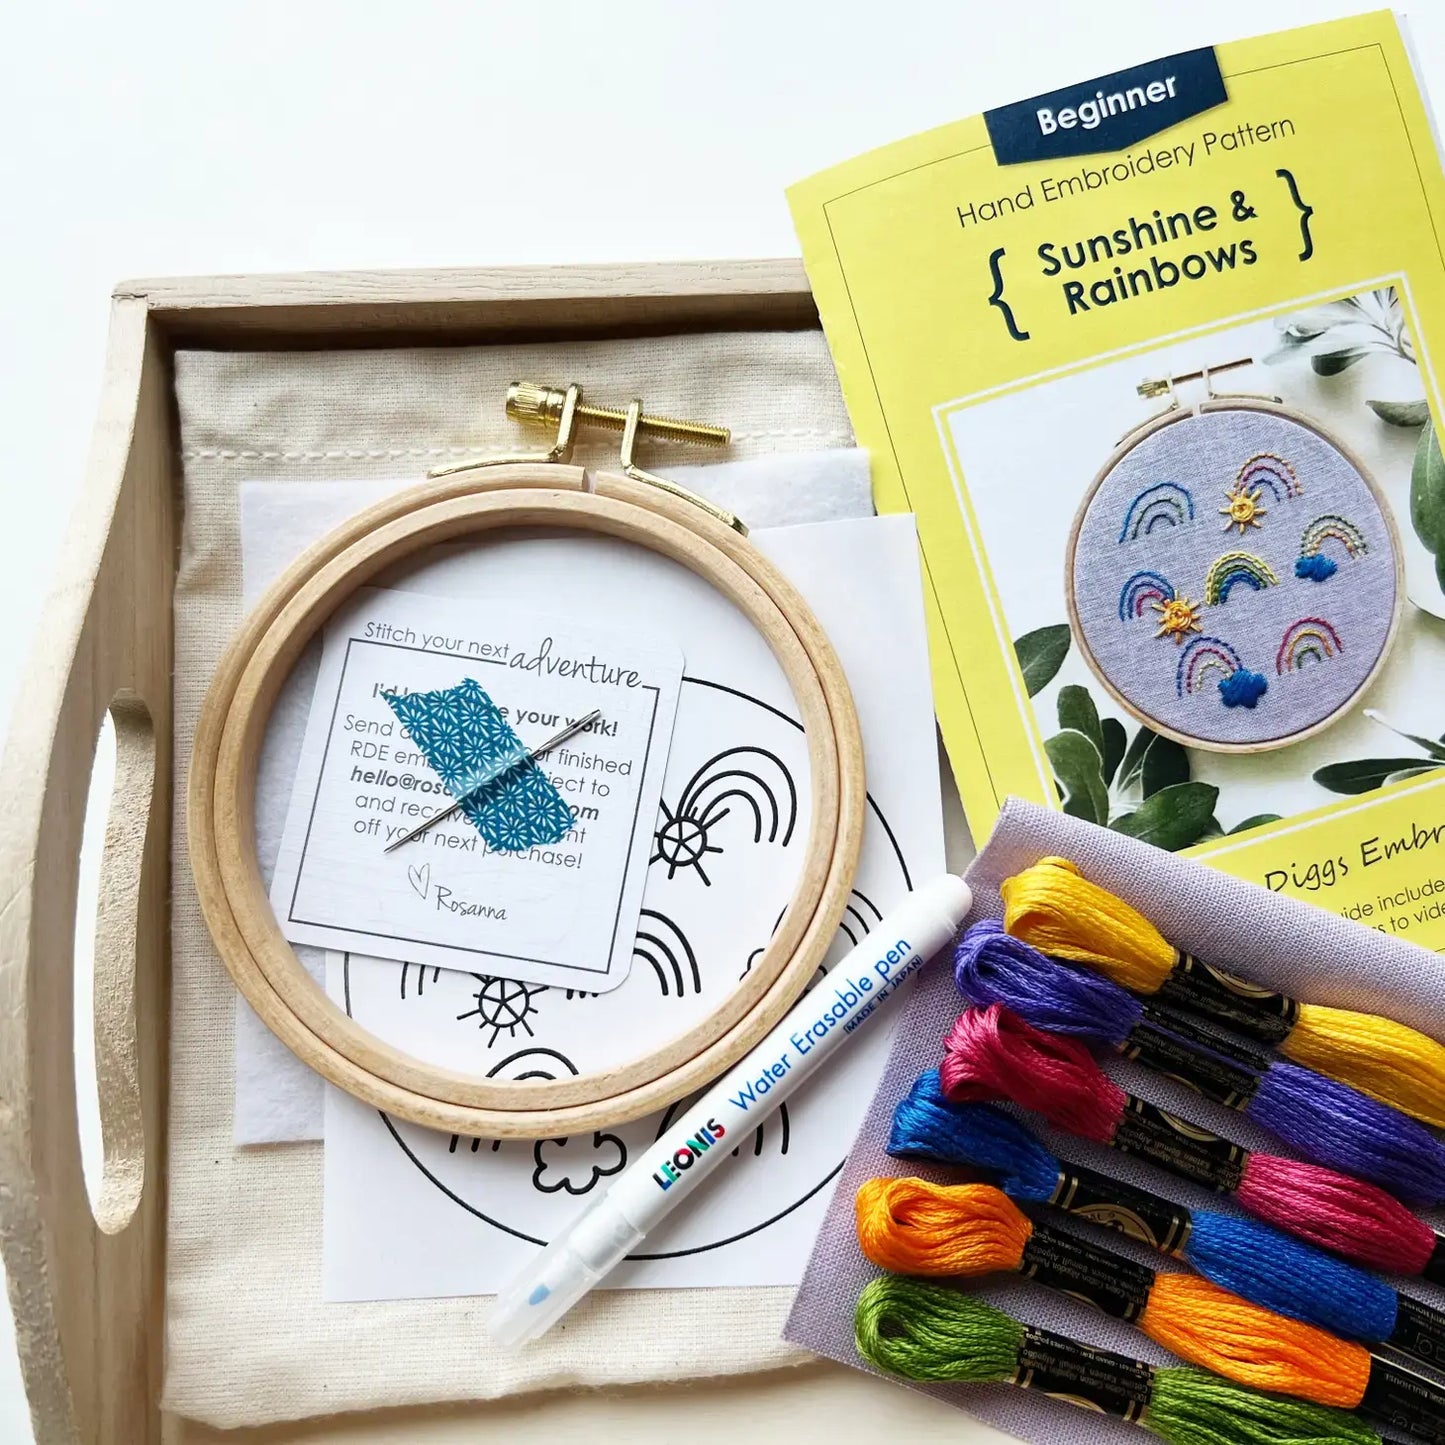 Learn 7 Hand Embroidery Stitches with Sunshines & Rainbows Kit